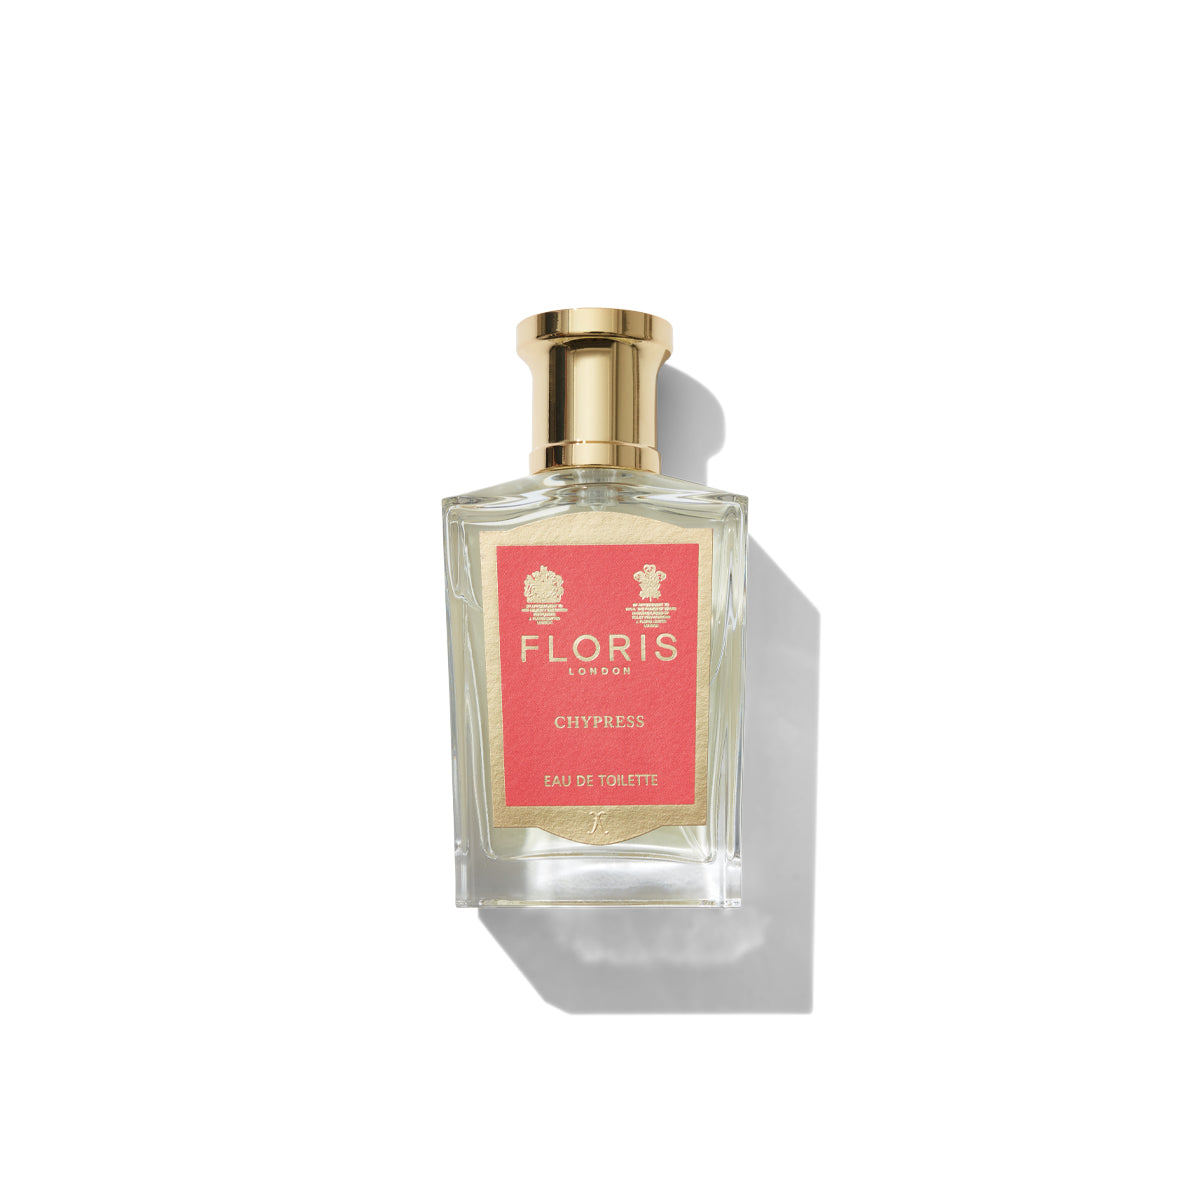 A Floris London Chypress Eau de Toilette bottle with a gold cap and a pink label on a white background, featuring notes of enveloping musk.